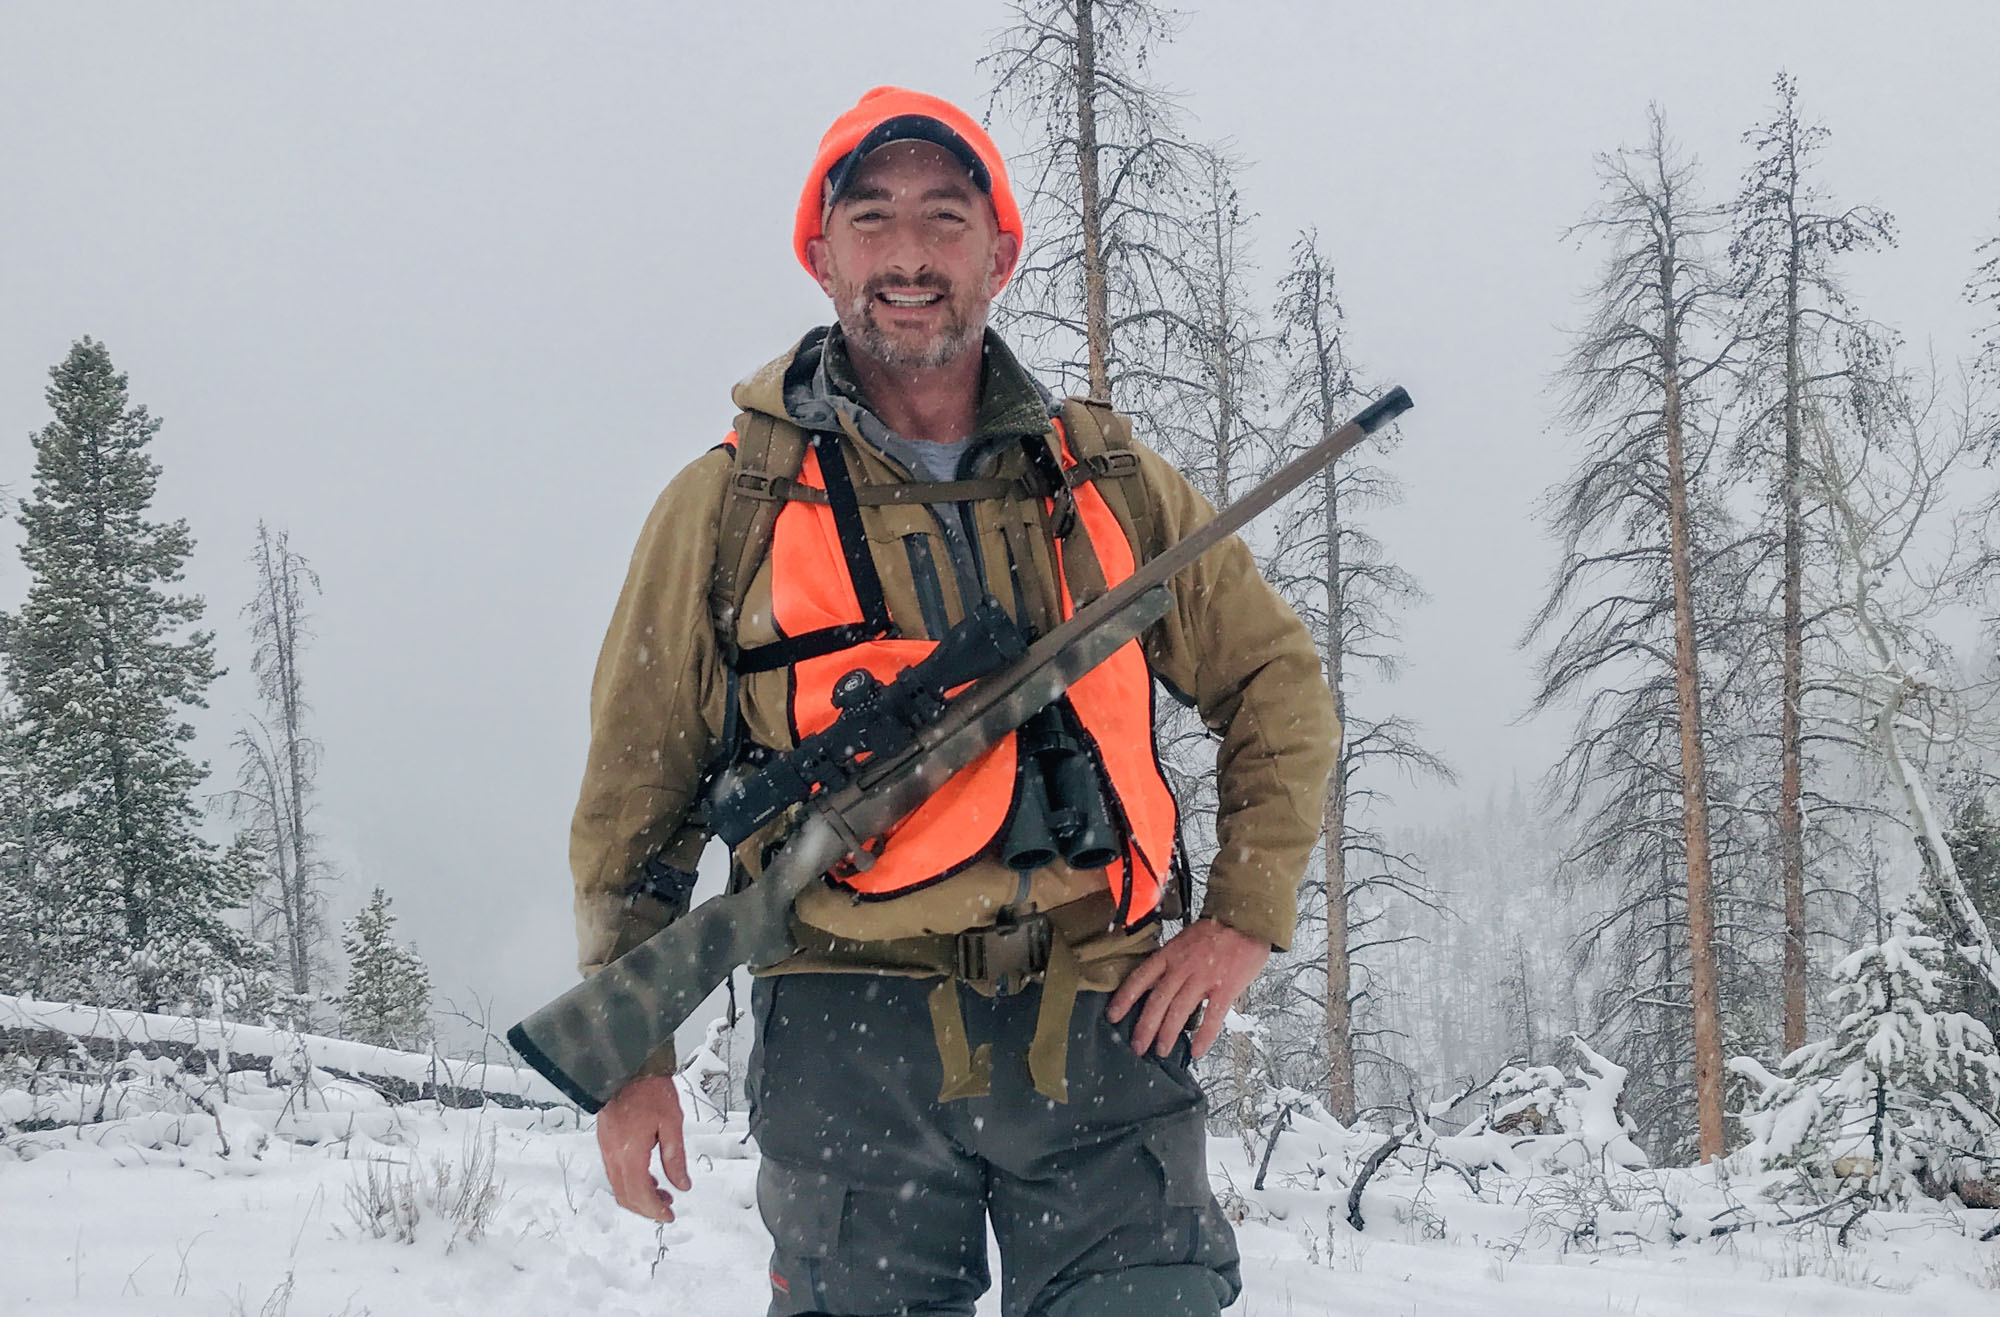 308 win rifle for elk hunting